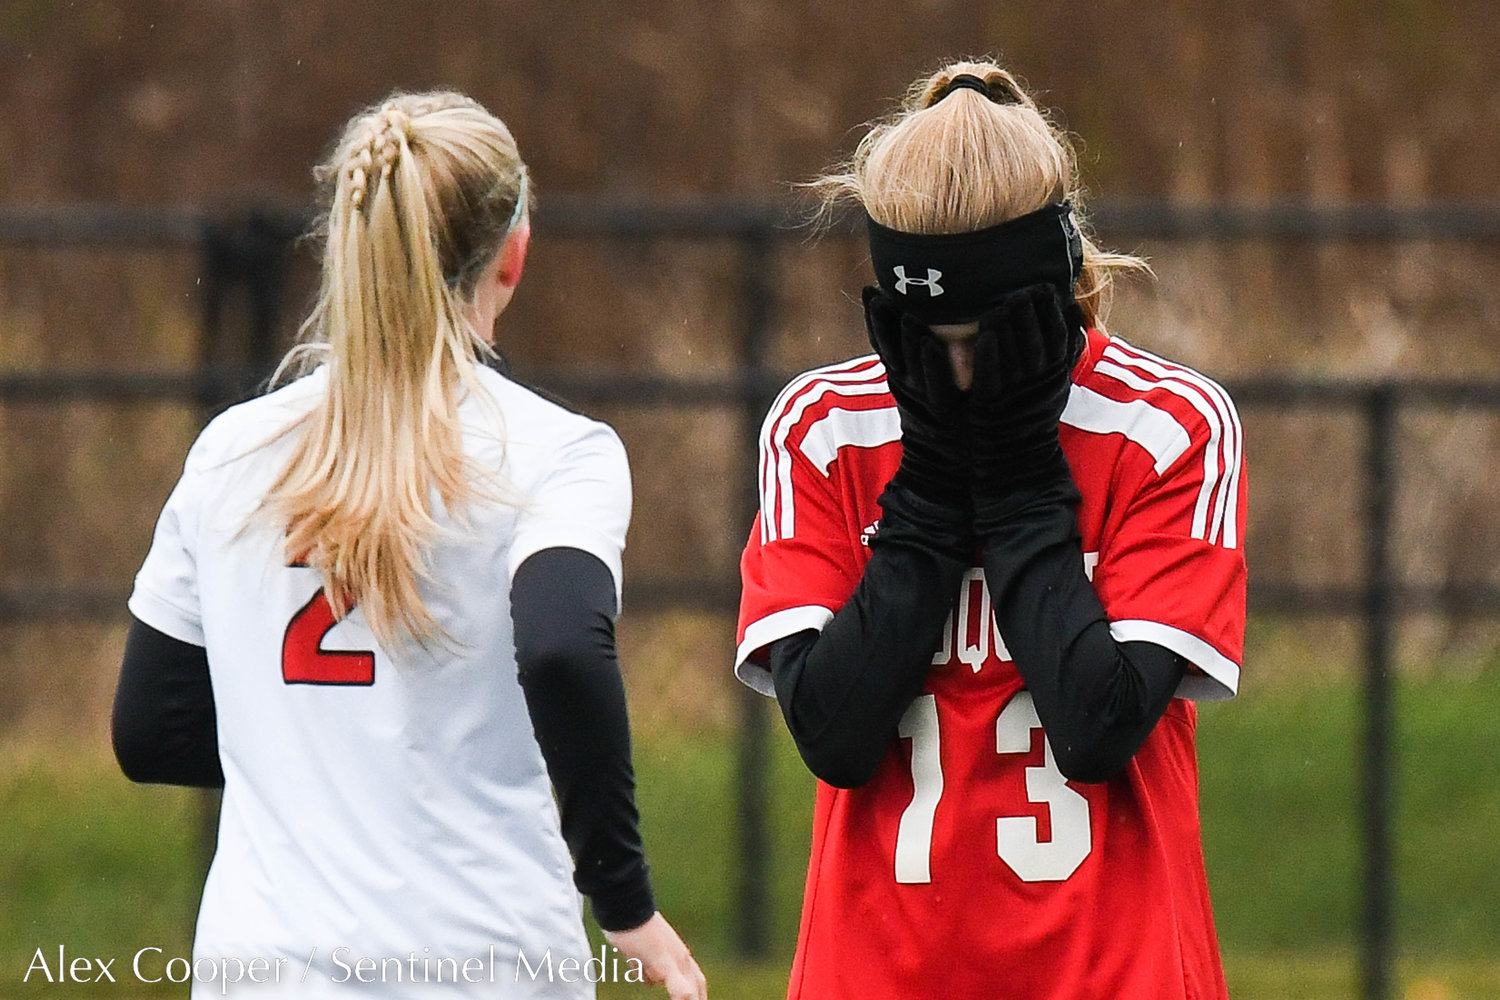 Sauquoit Valley player Kamryn Yerman (13) reacts after Waterford-Halfmoon scores a goal during the Class C state final on Sunday at Cortland High School. The Indians lost 6-3.